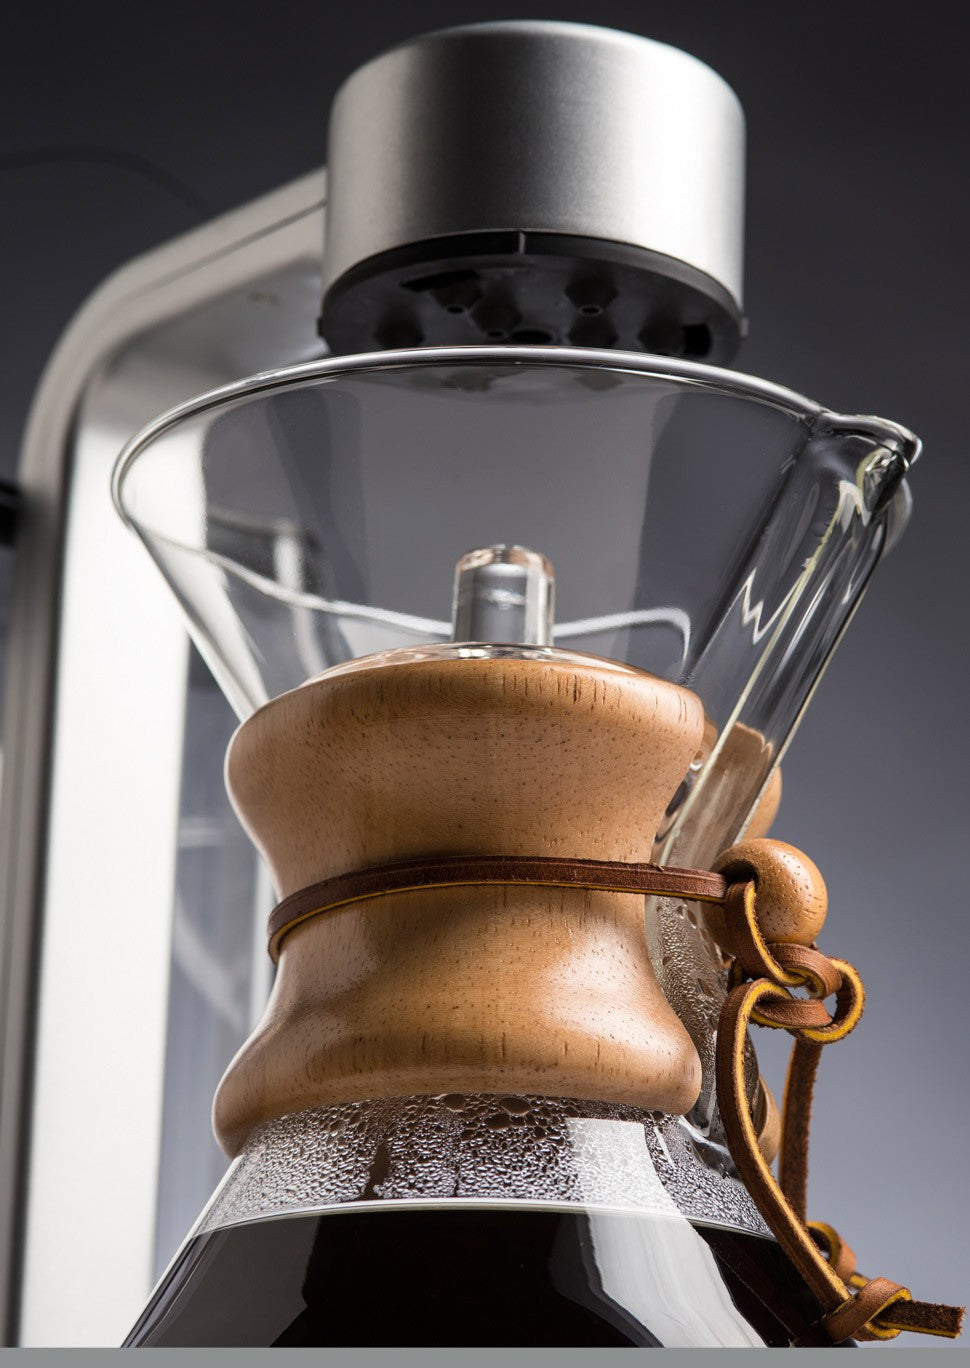 It's Electric: The Chemex Ottomatic Coffeemaker